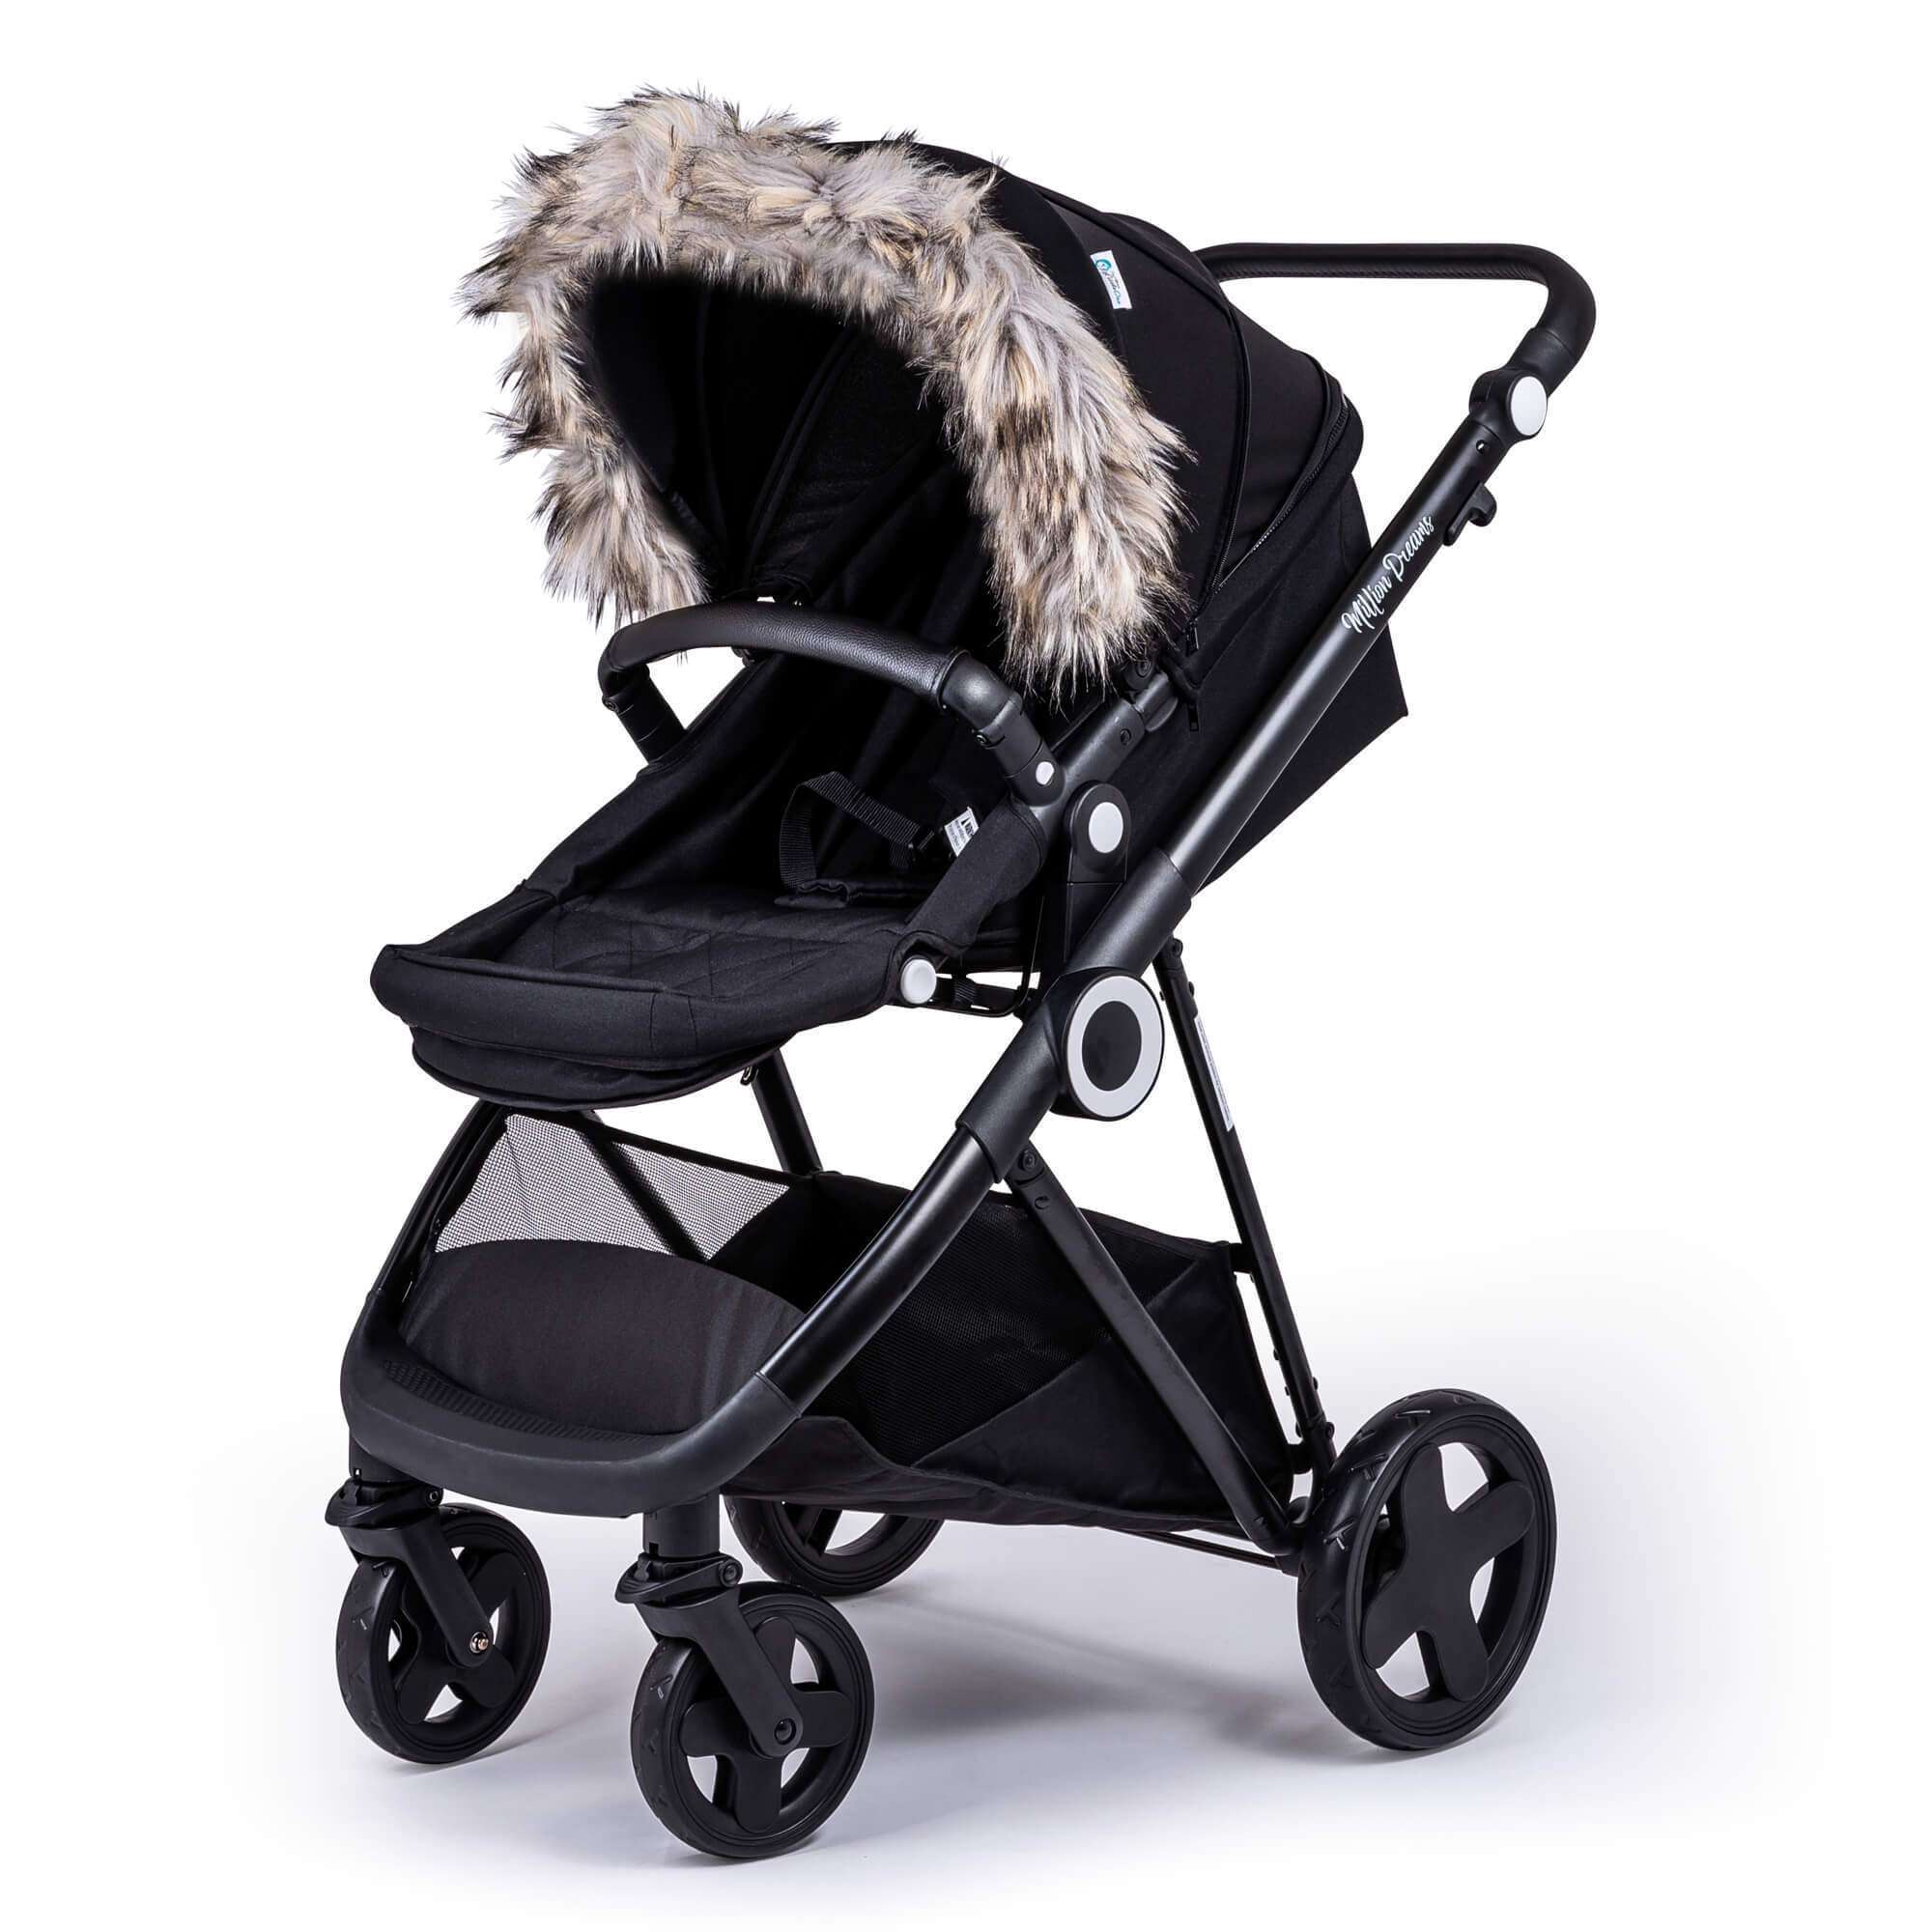 Pram Fur Hood Trim Attachment for Pushchair Compatible with Bebecar - Light Grey / Fits All Models | For Your Little One